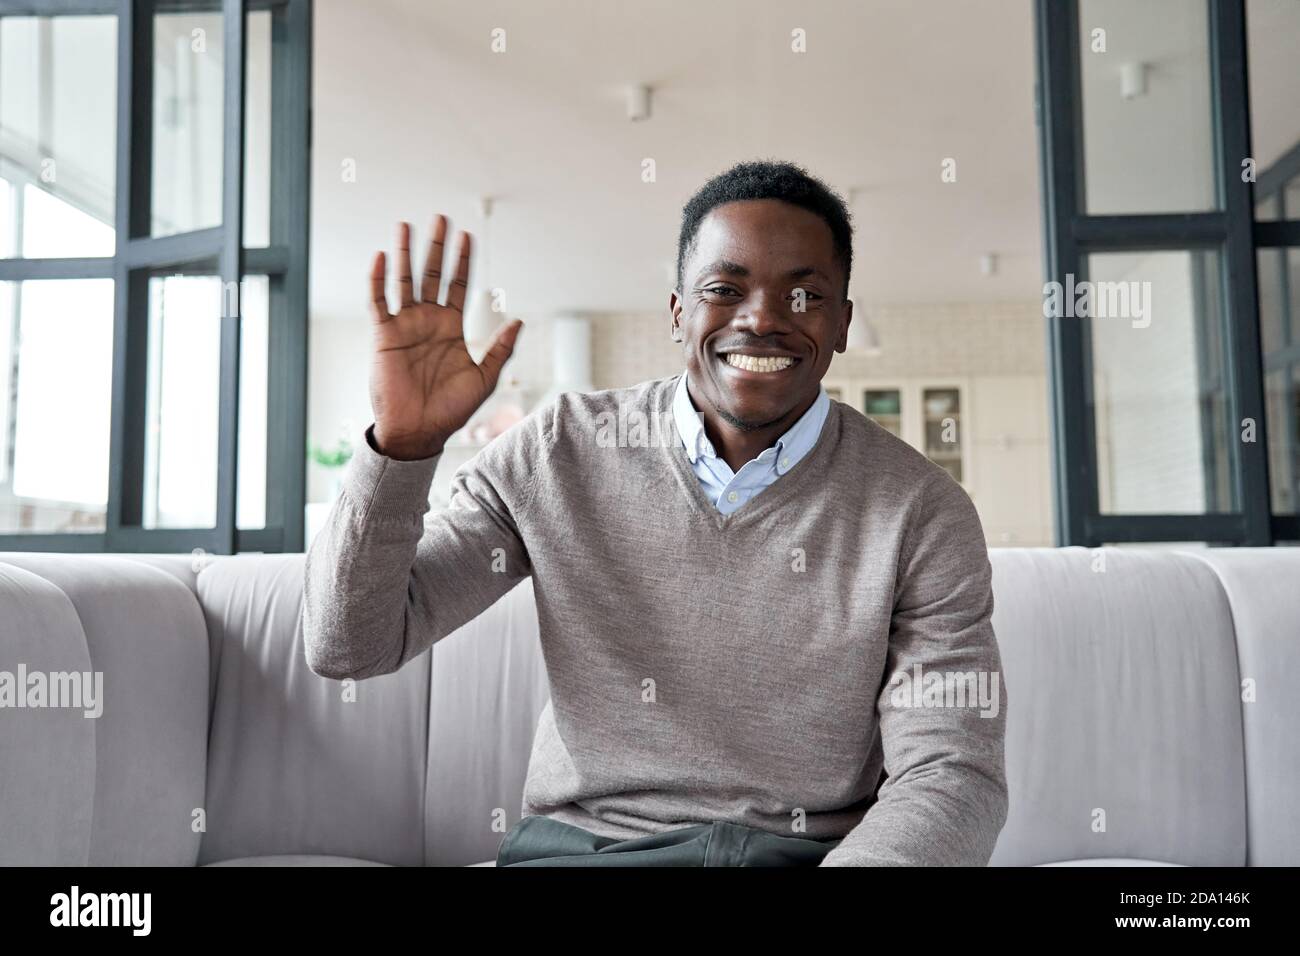 Happy african young man waving hand looking at camera video conference calling. Stock Photo